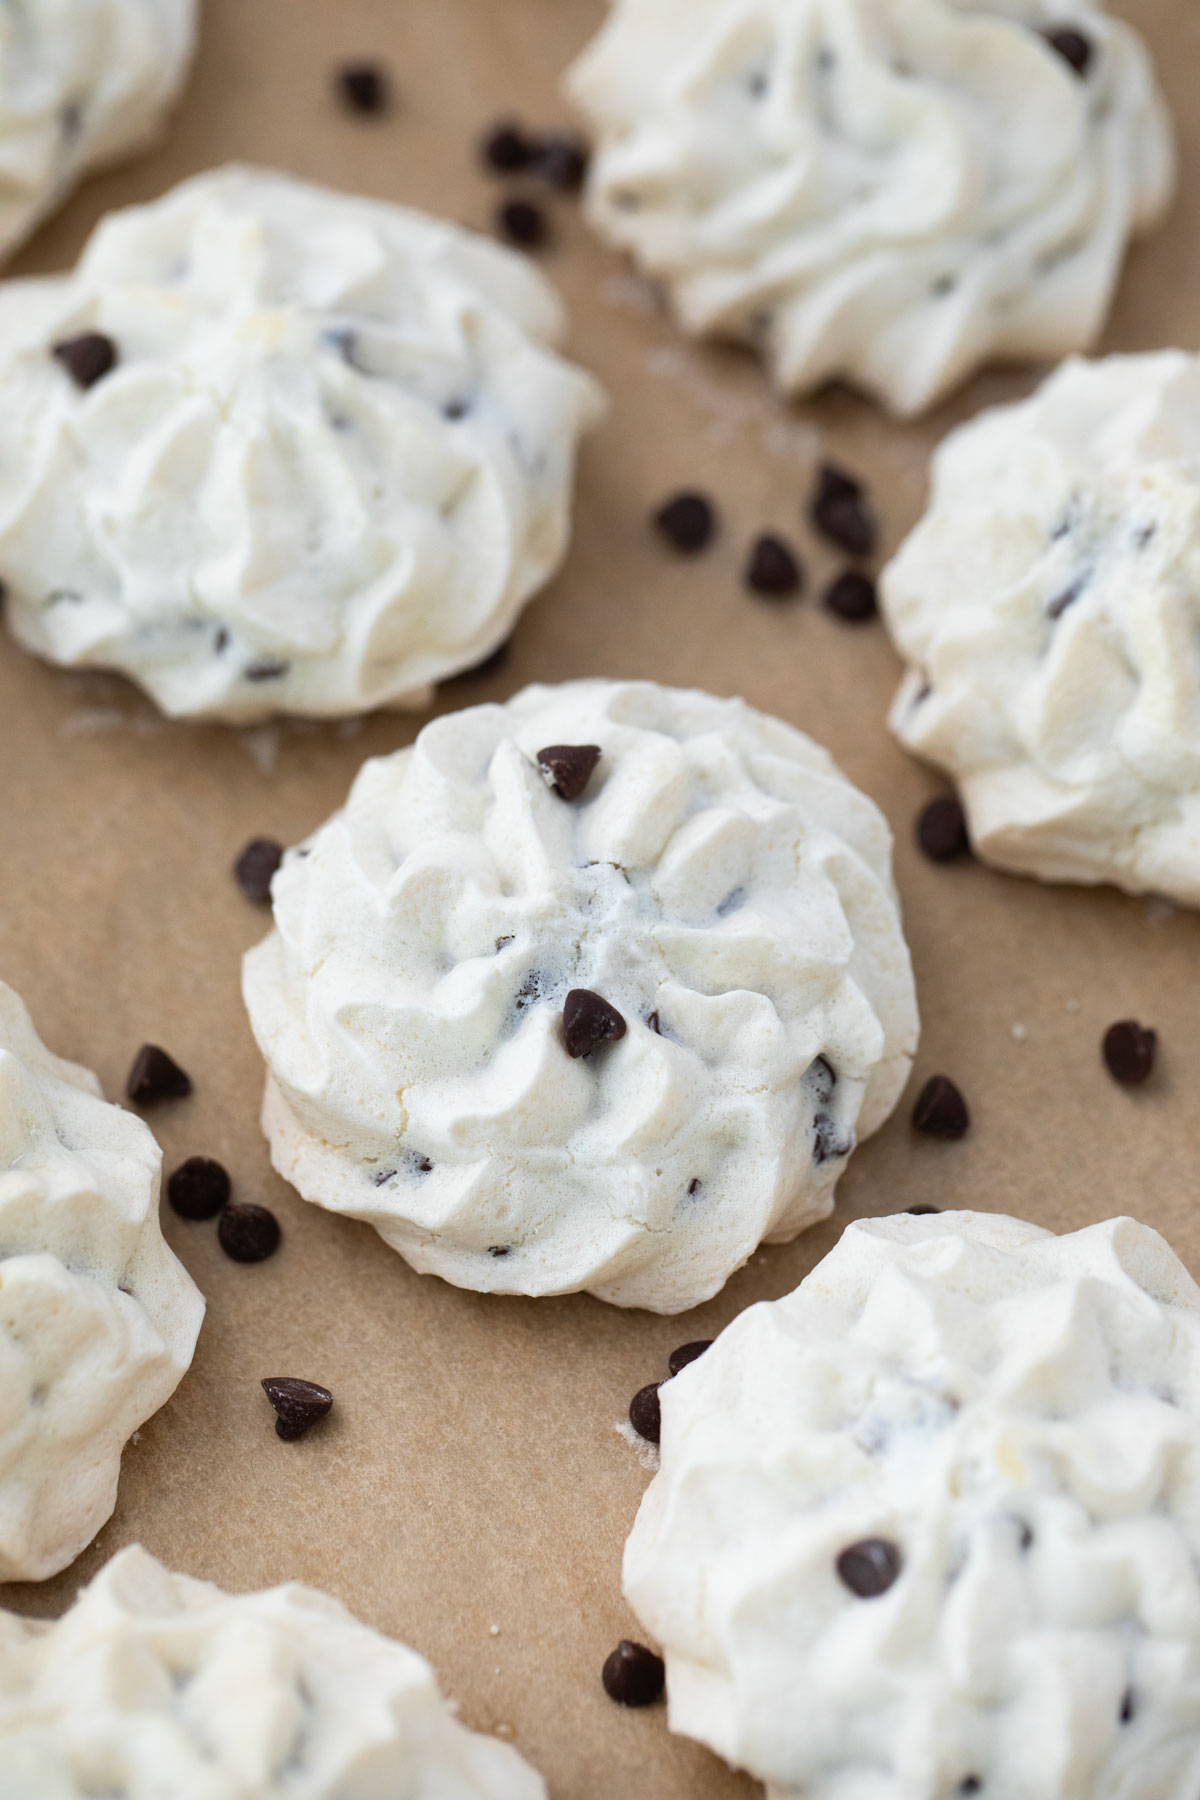 Chocolate chip meringue cookies on a baking sheet.